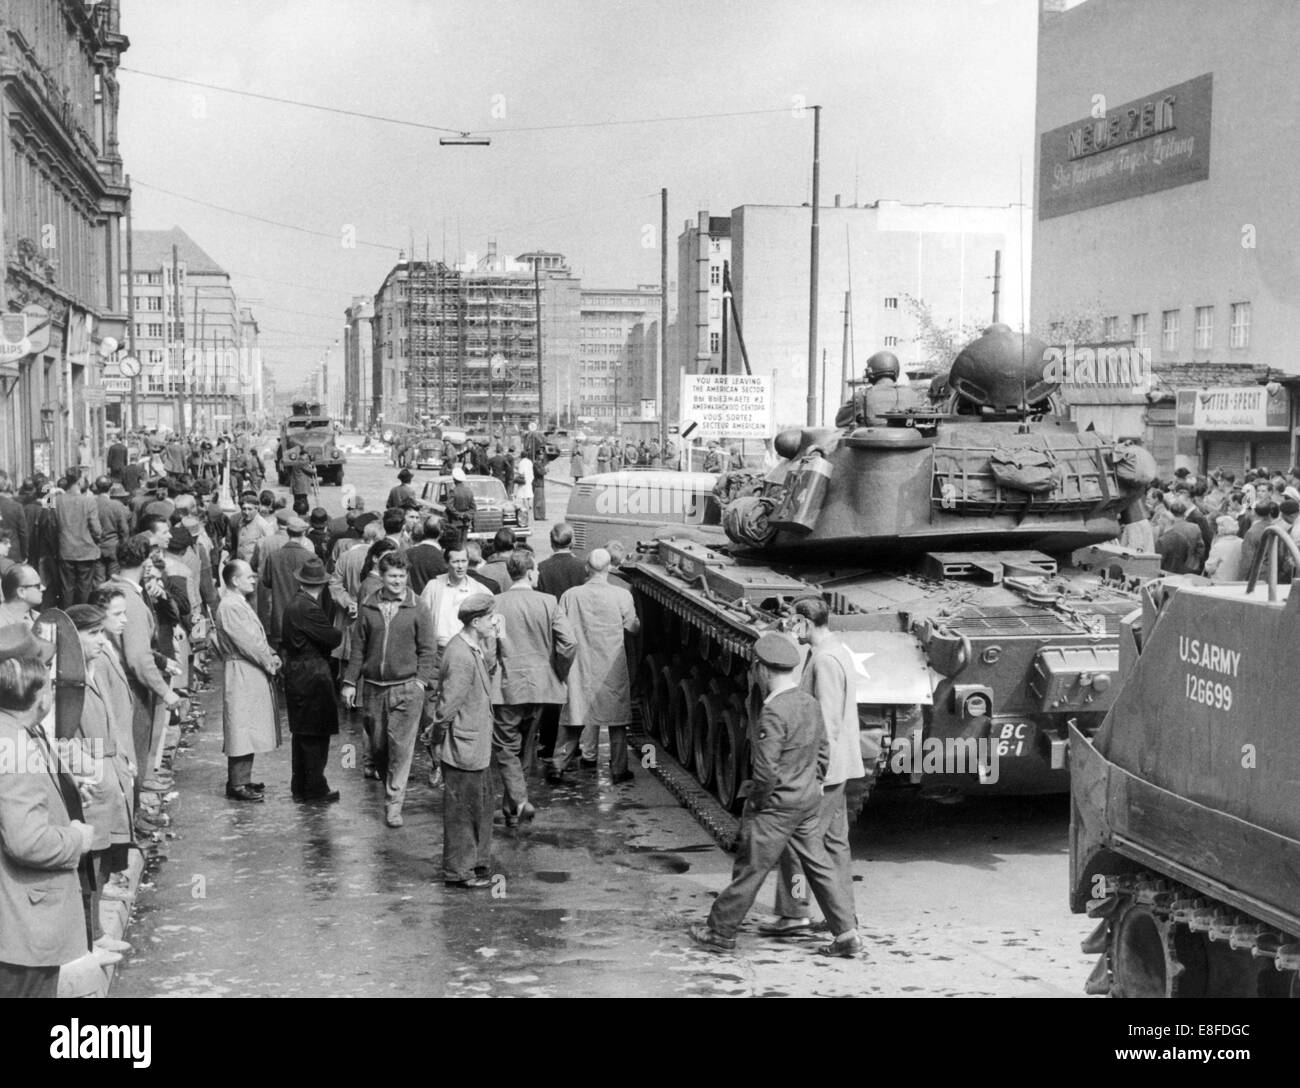 Tanks and soldiers of the US Army standing on the West Berlin side and the People's Police of the GDR, with a water gun, on the East Berlin side, at checkpoint Friedrichstraße in Berlin on 24th August 1961. From 13th August 1961, the day of the building of the wall, until the fall of Berlin Wall on 9th November 1989 the Federal Republic of Germany and the GDR were split by the 'iron curtain' between west and east. Stock Photo